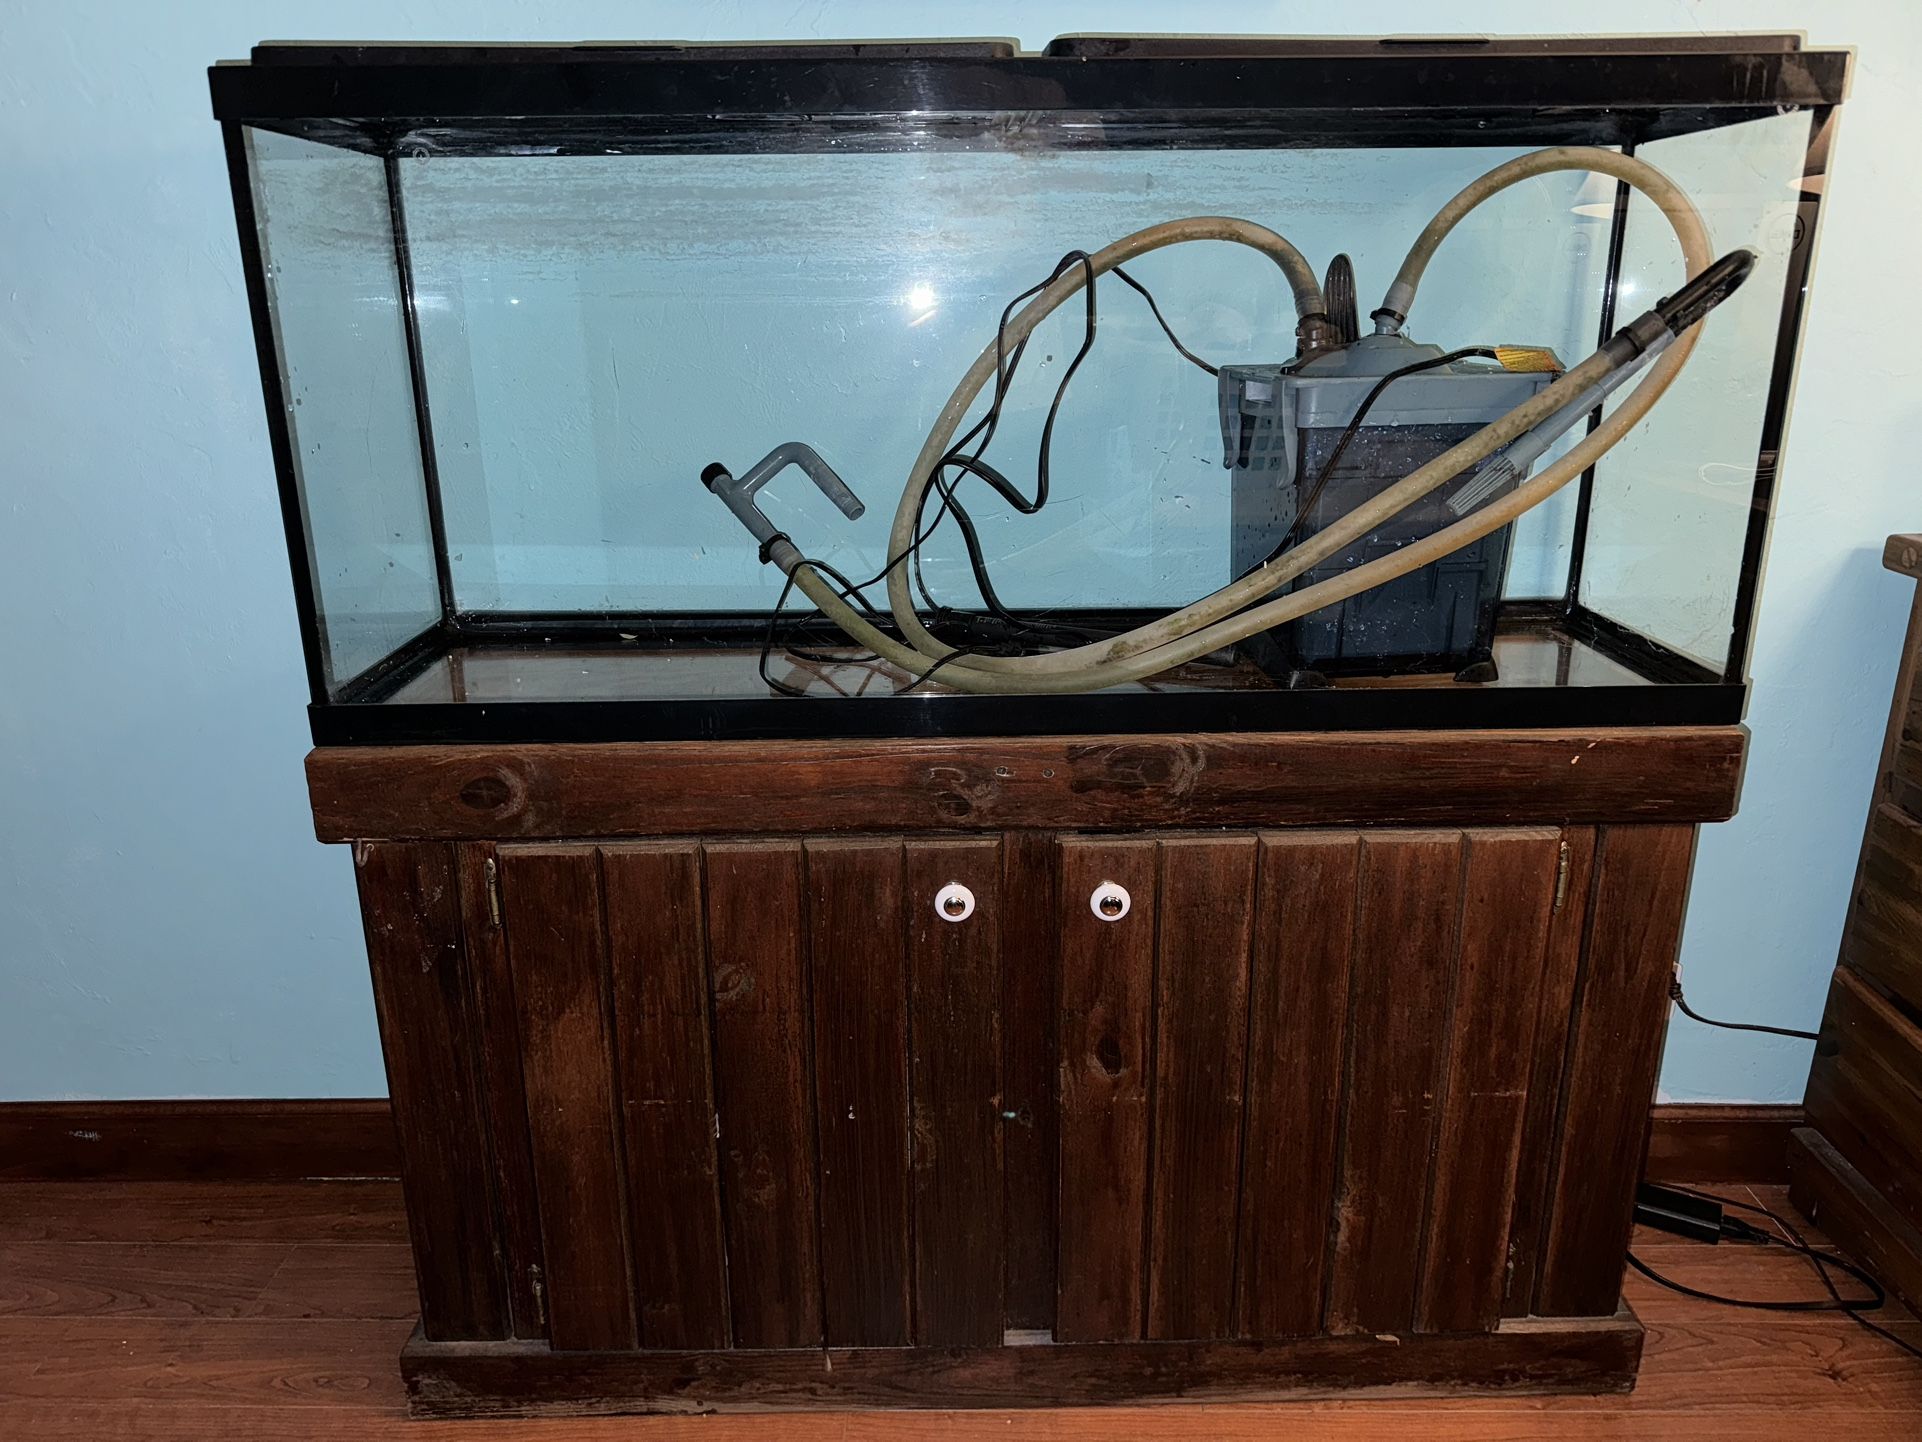 55 GALLON FISH TANK WITH STAND AND PUMP